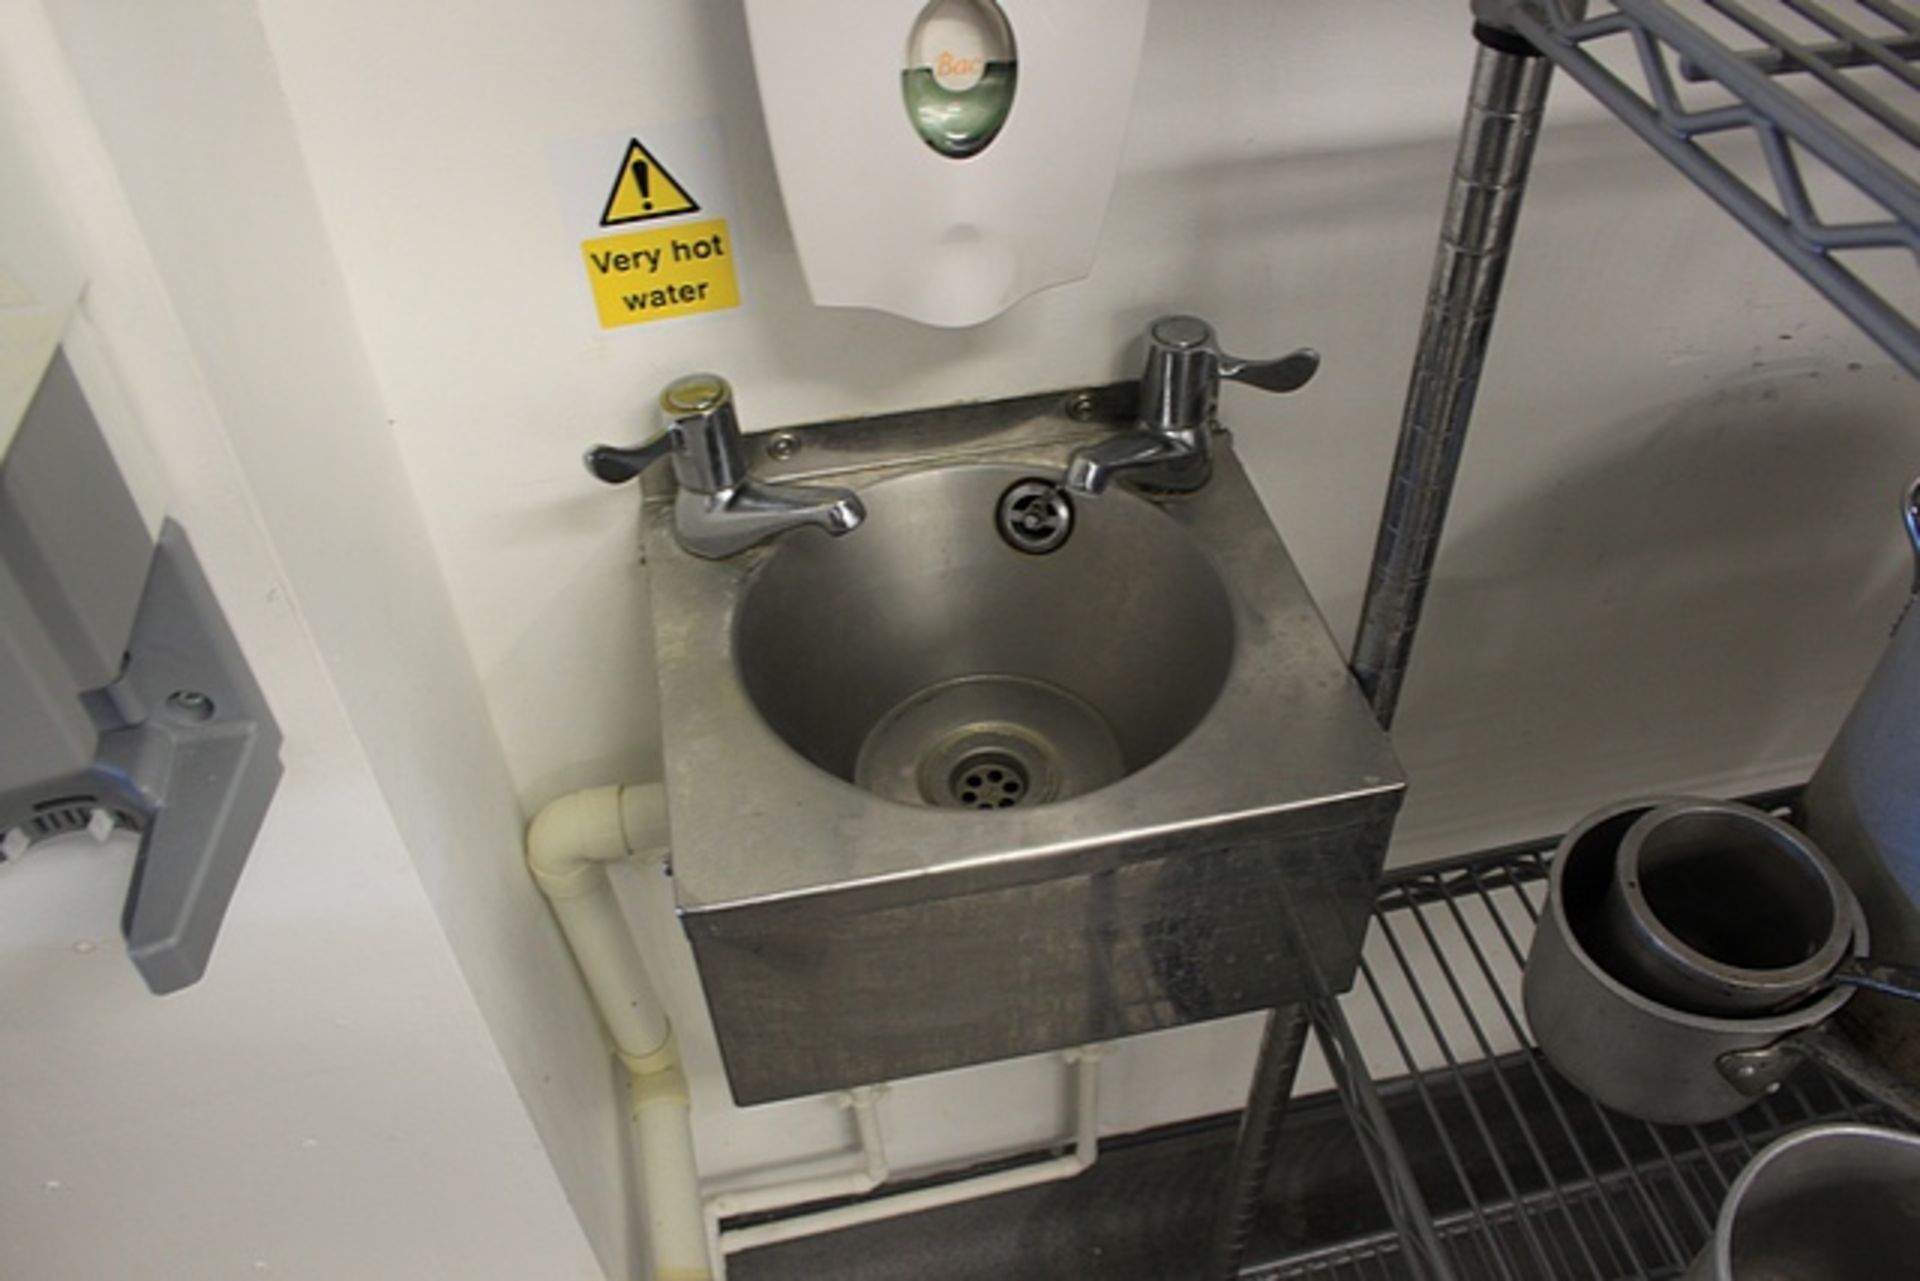 Stainless steel wall mount hand wash basin Location in College 4th Floor